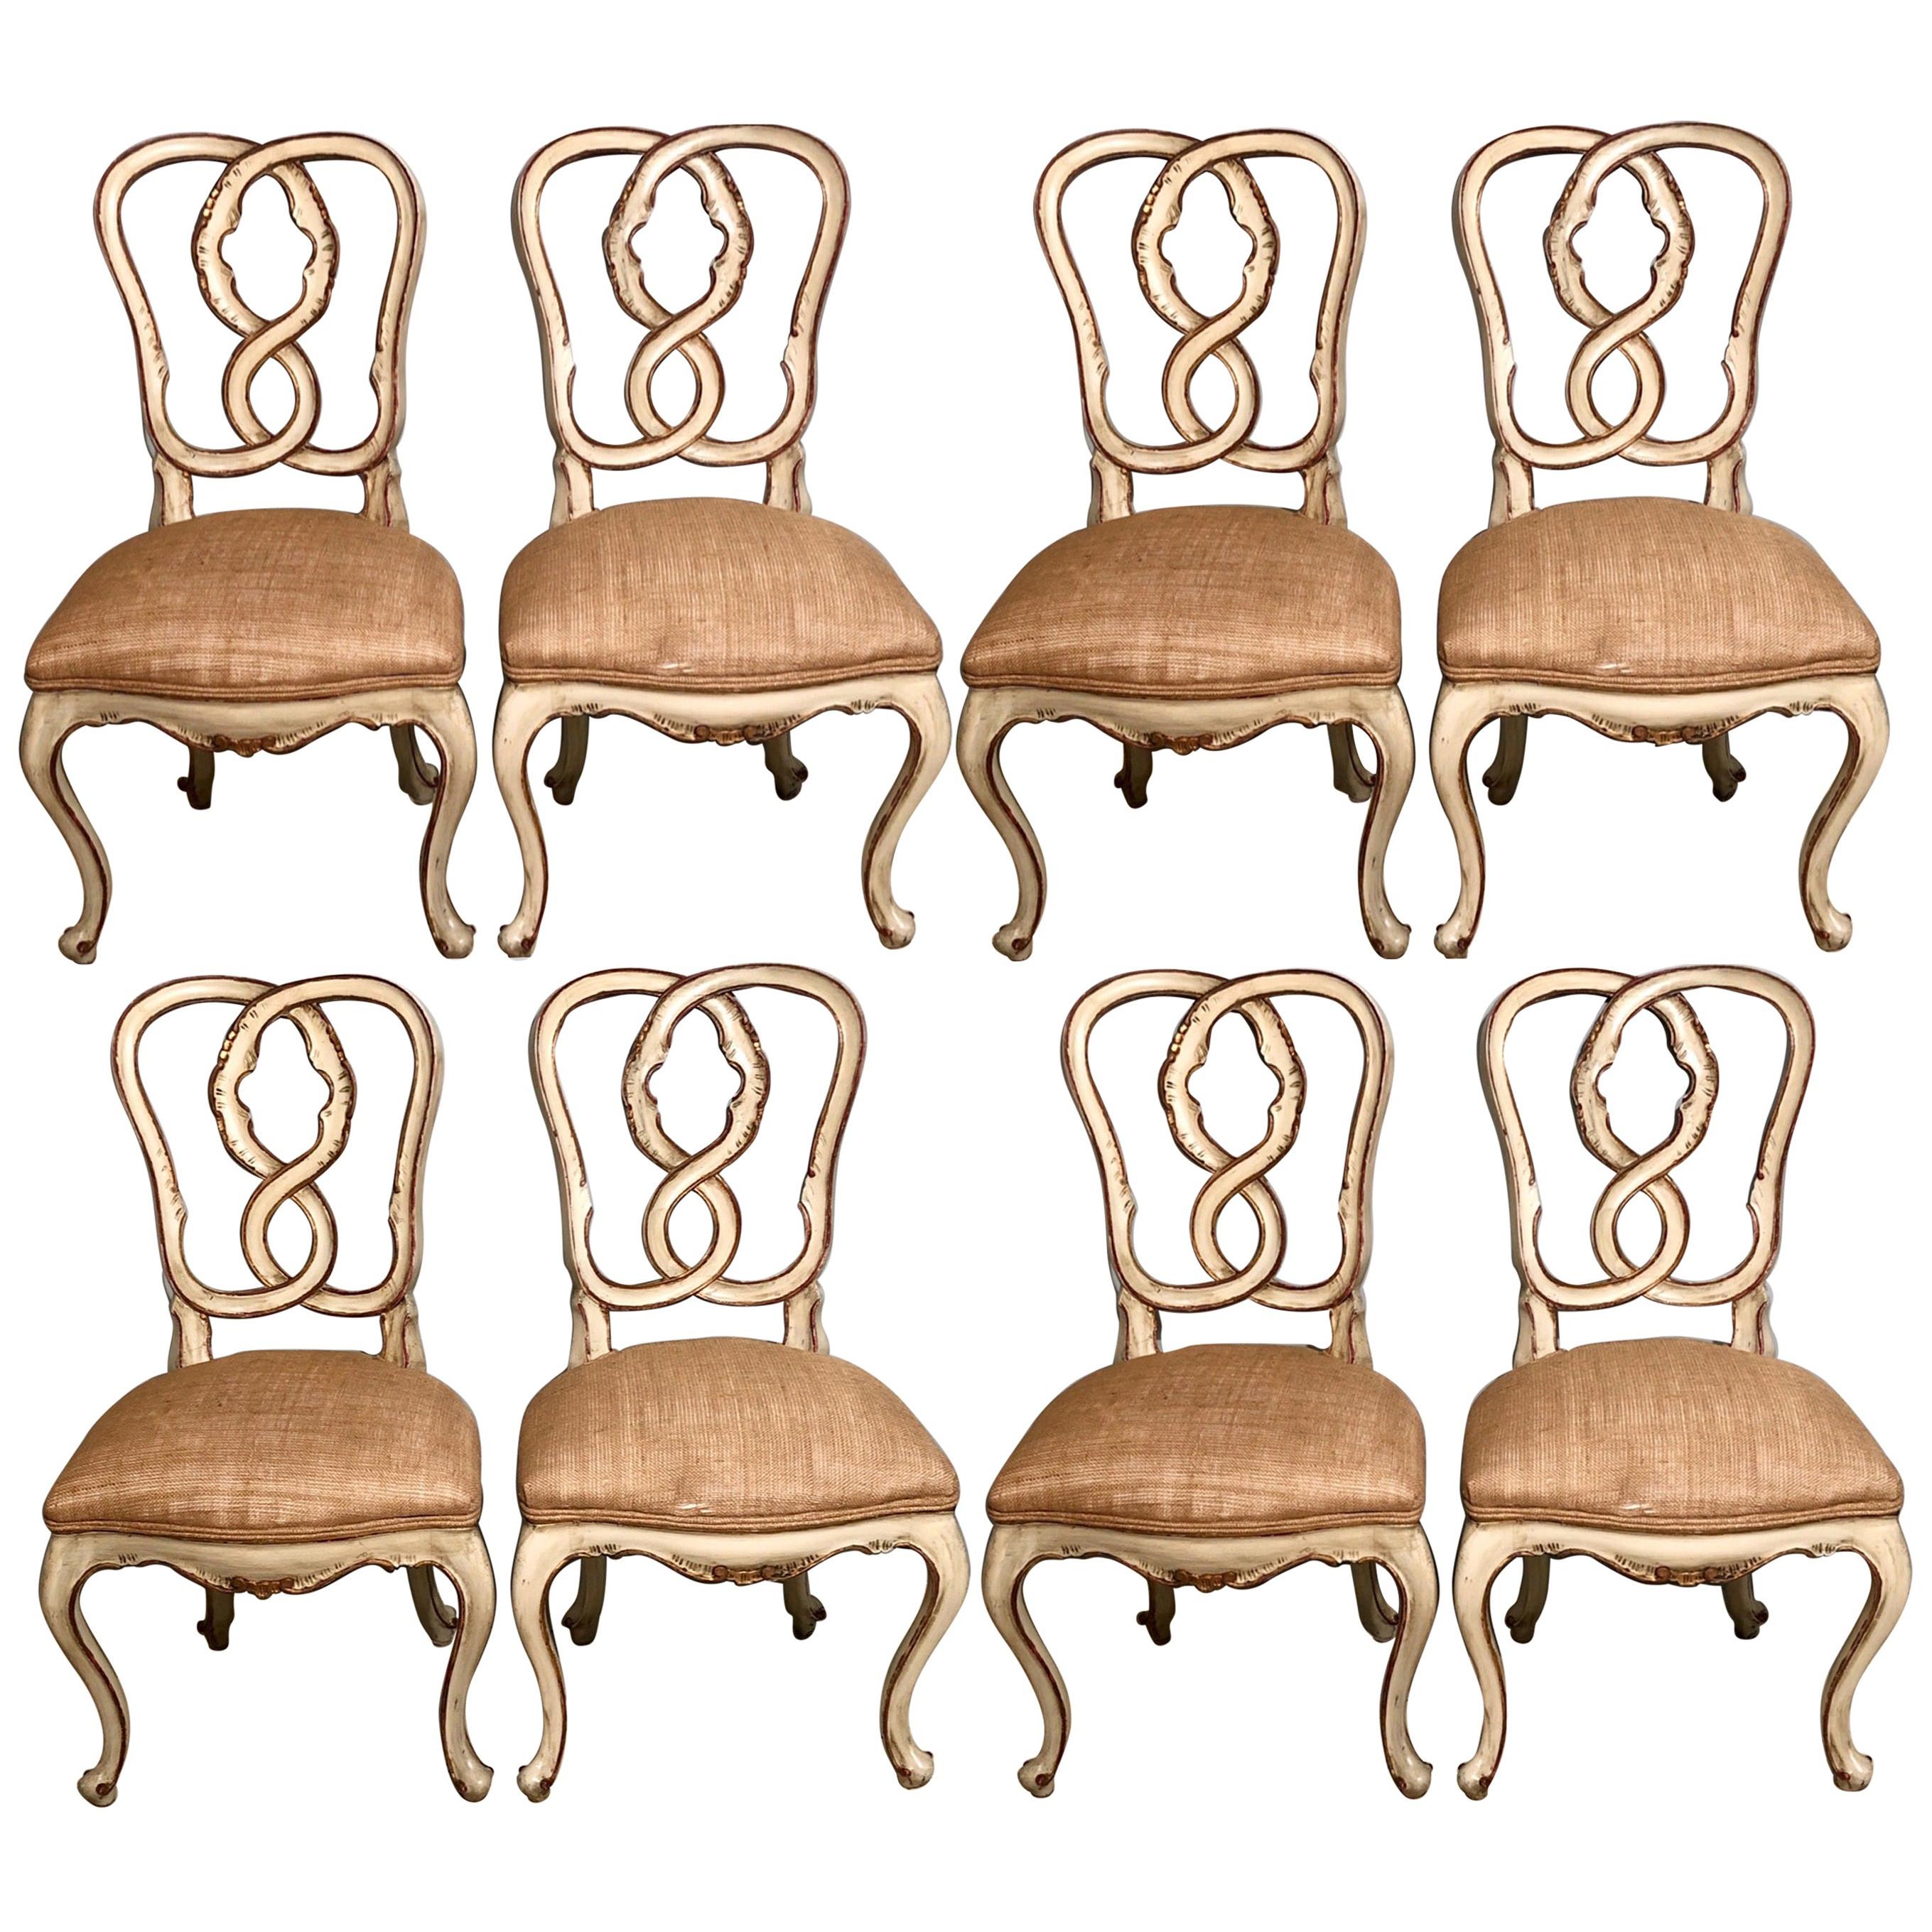 Set of 8 Louis XV Style Dining Chairs, Parcel-Gilt and Paint Pretzel Heart Backs